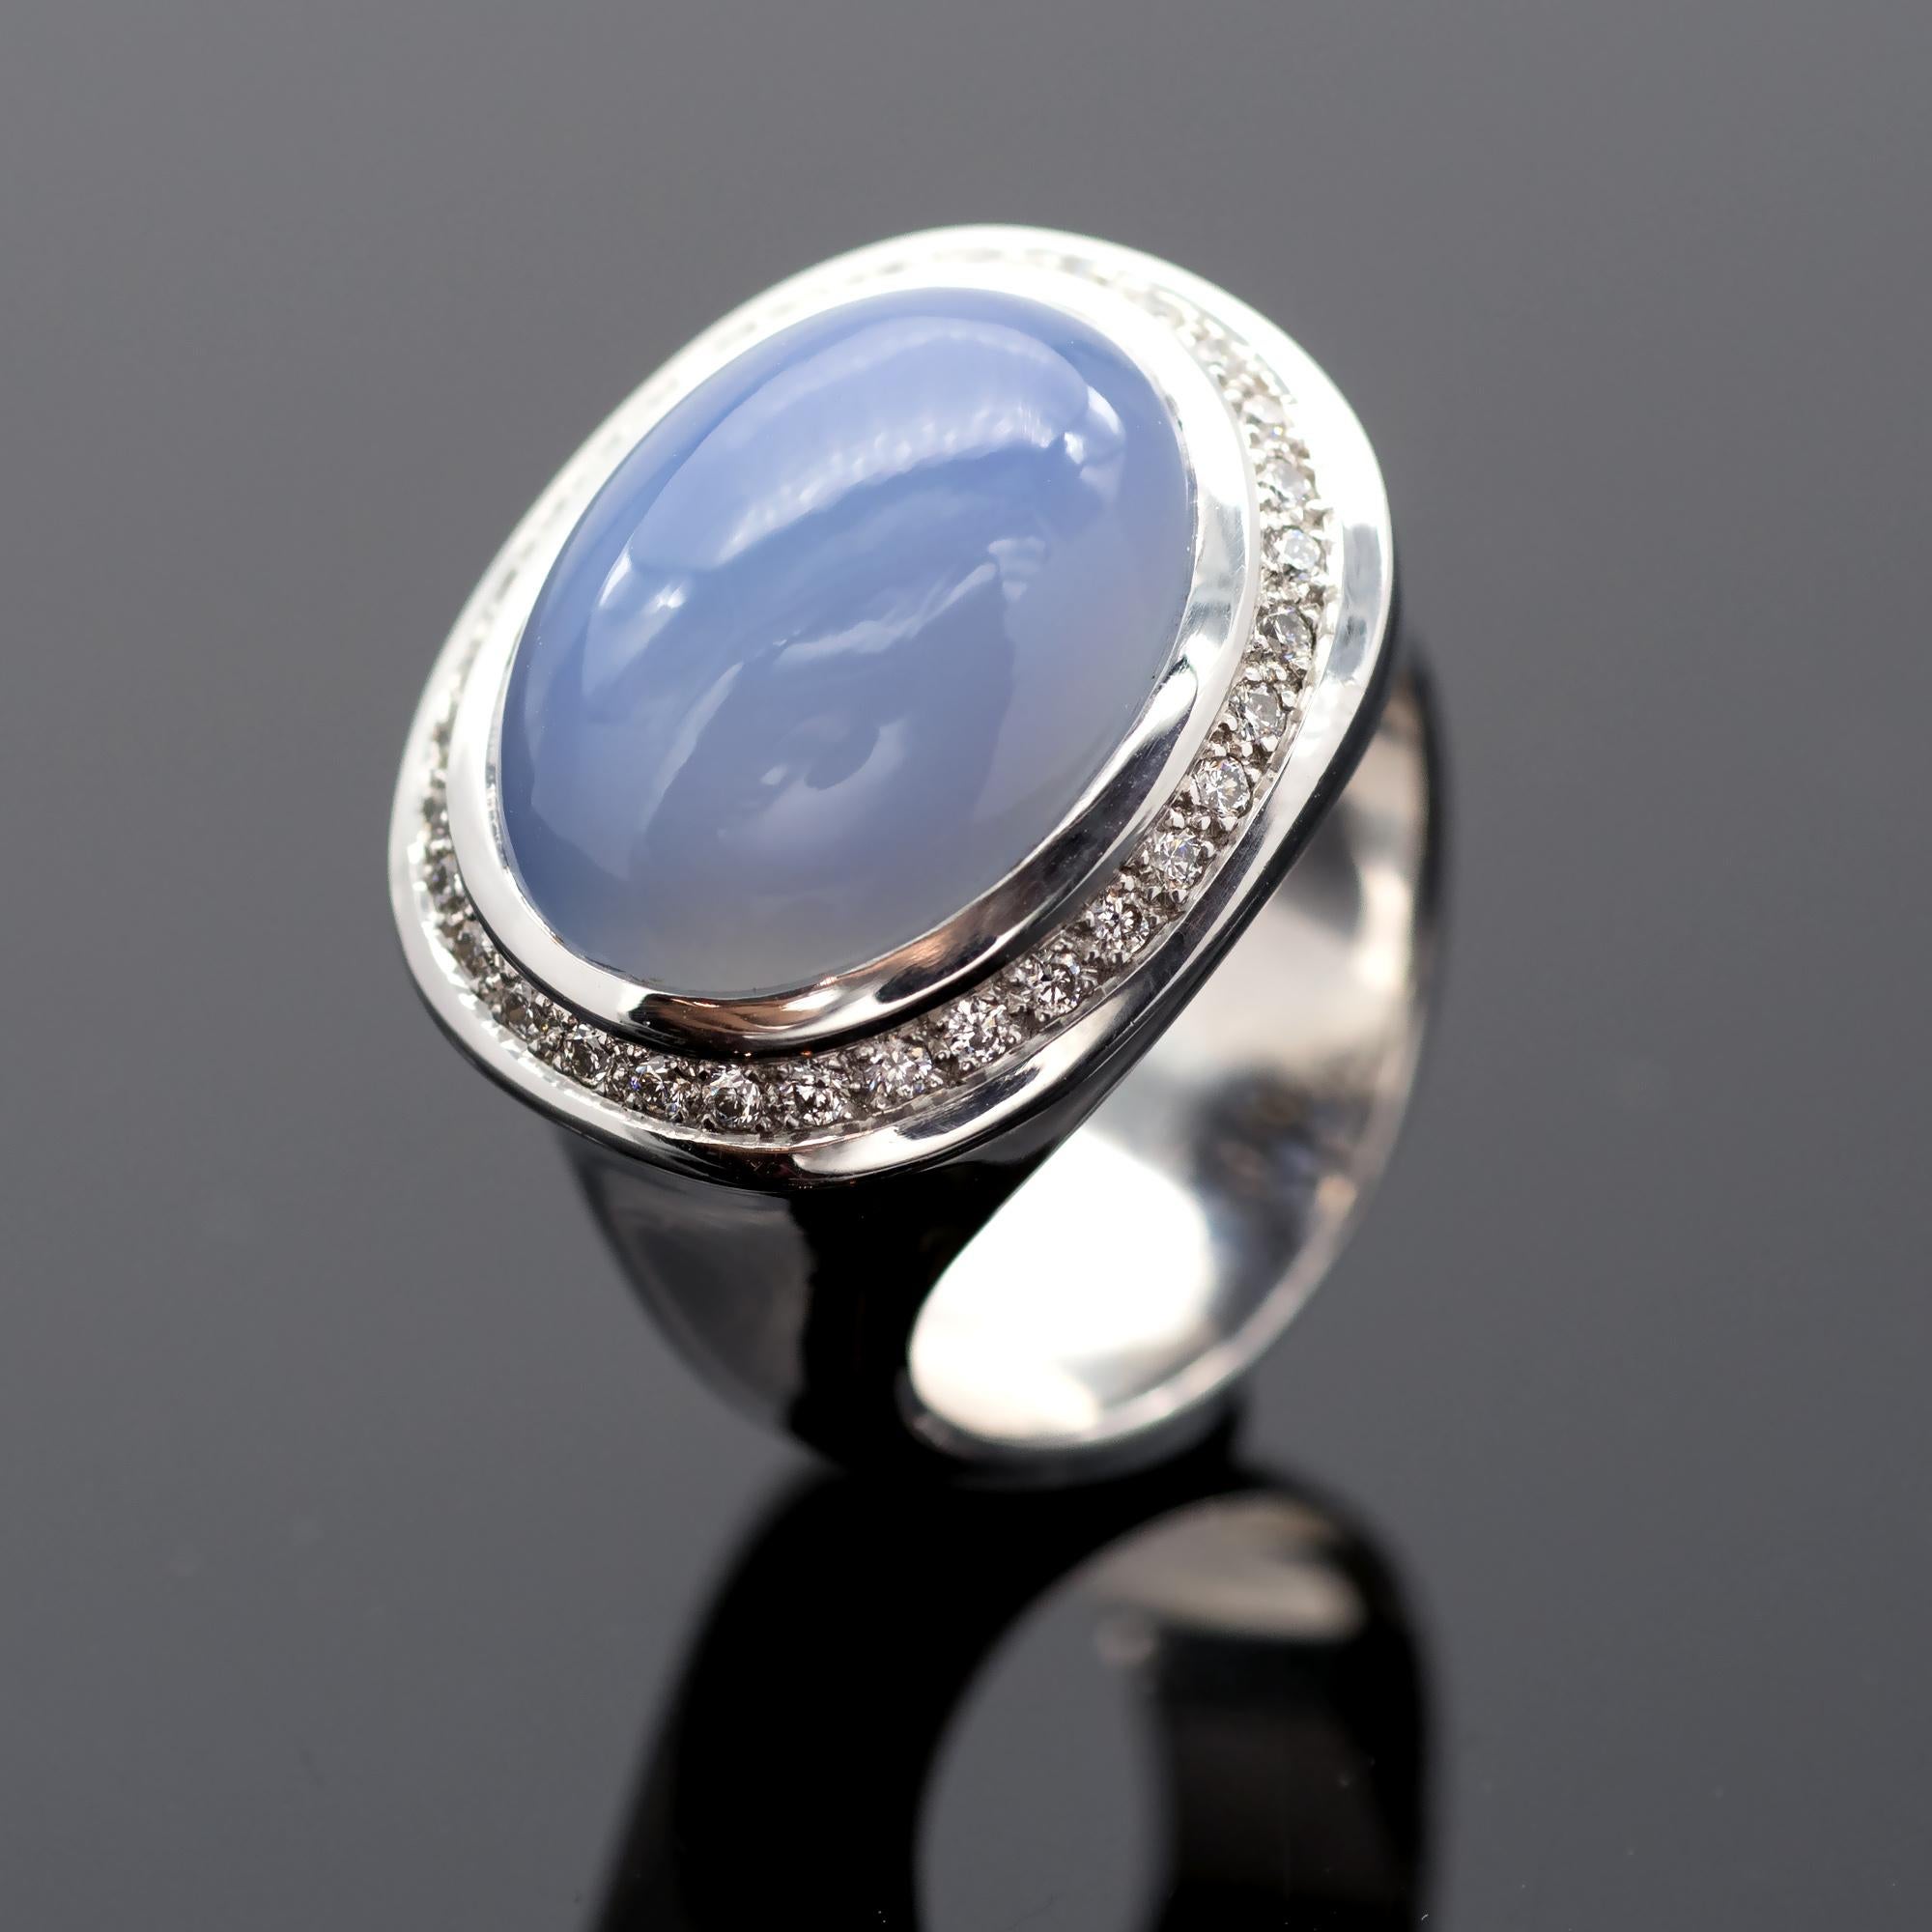 Stylish modern ring with a contemporary design. Perfect lines, hefty 18kt White gold, perfect setting and make this important cocktail ring simple yet powerful. The center chalcedony is bezel set across the finger with a line of brilliant cut